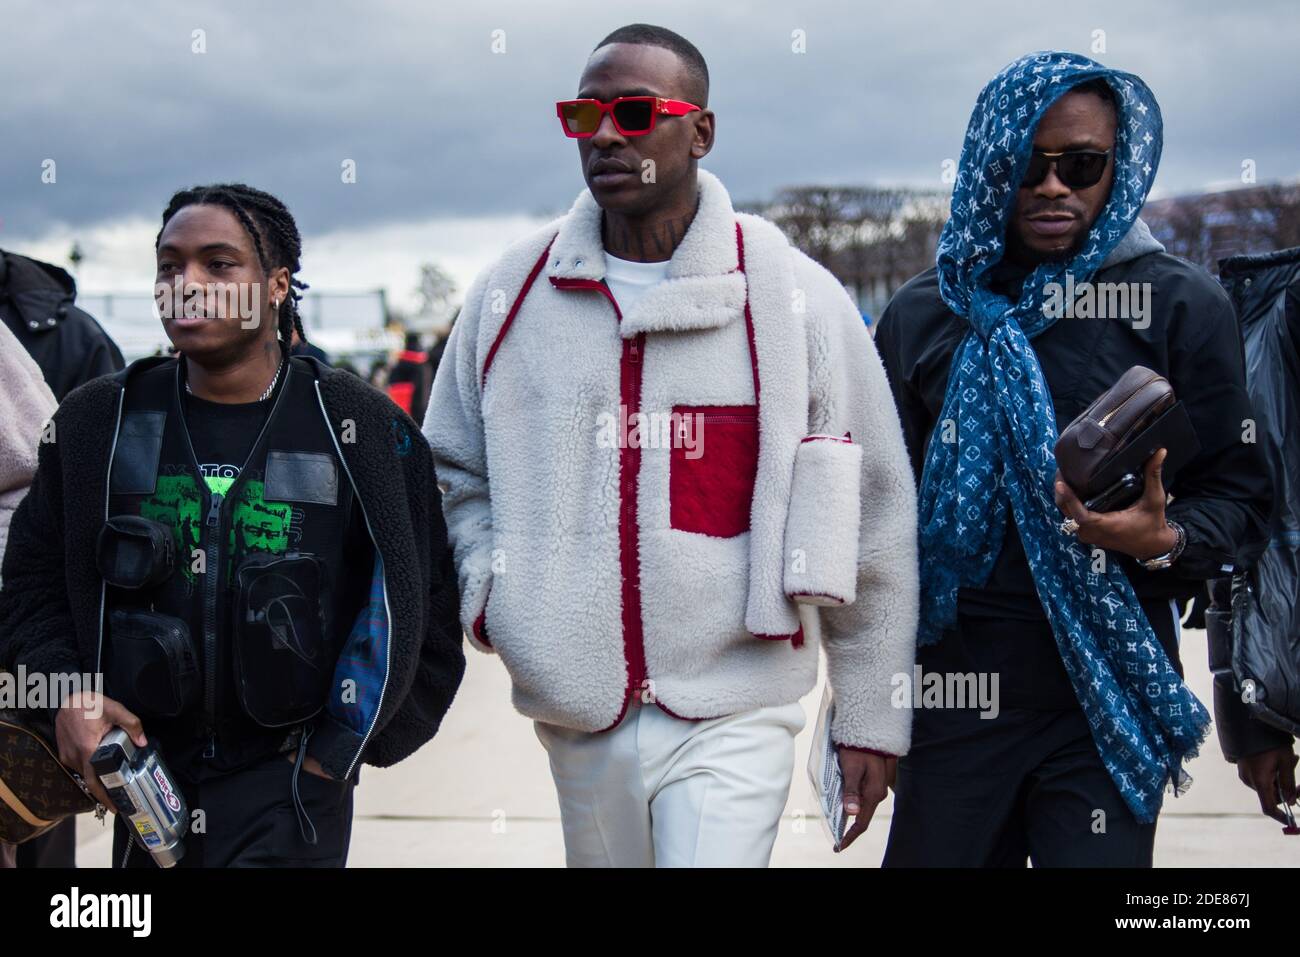 SPOTTED: Skepta Takes the Elevator in Louis Vuitton AW19′ Puffer